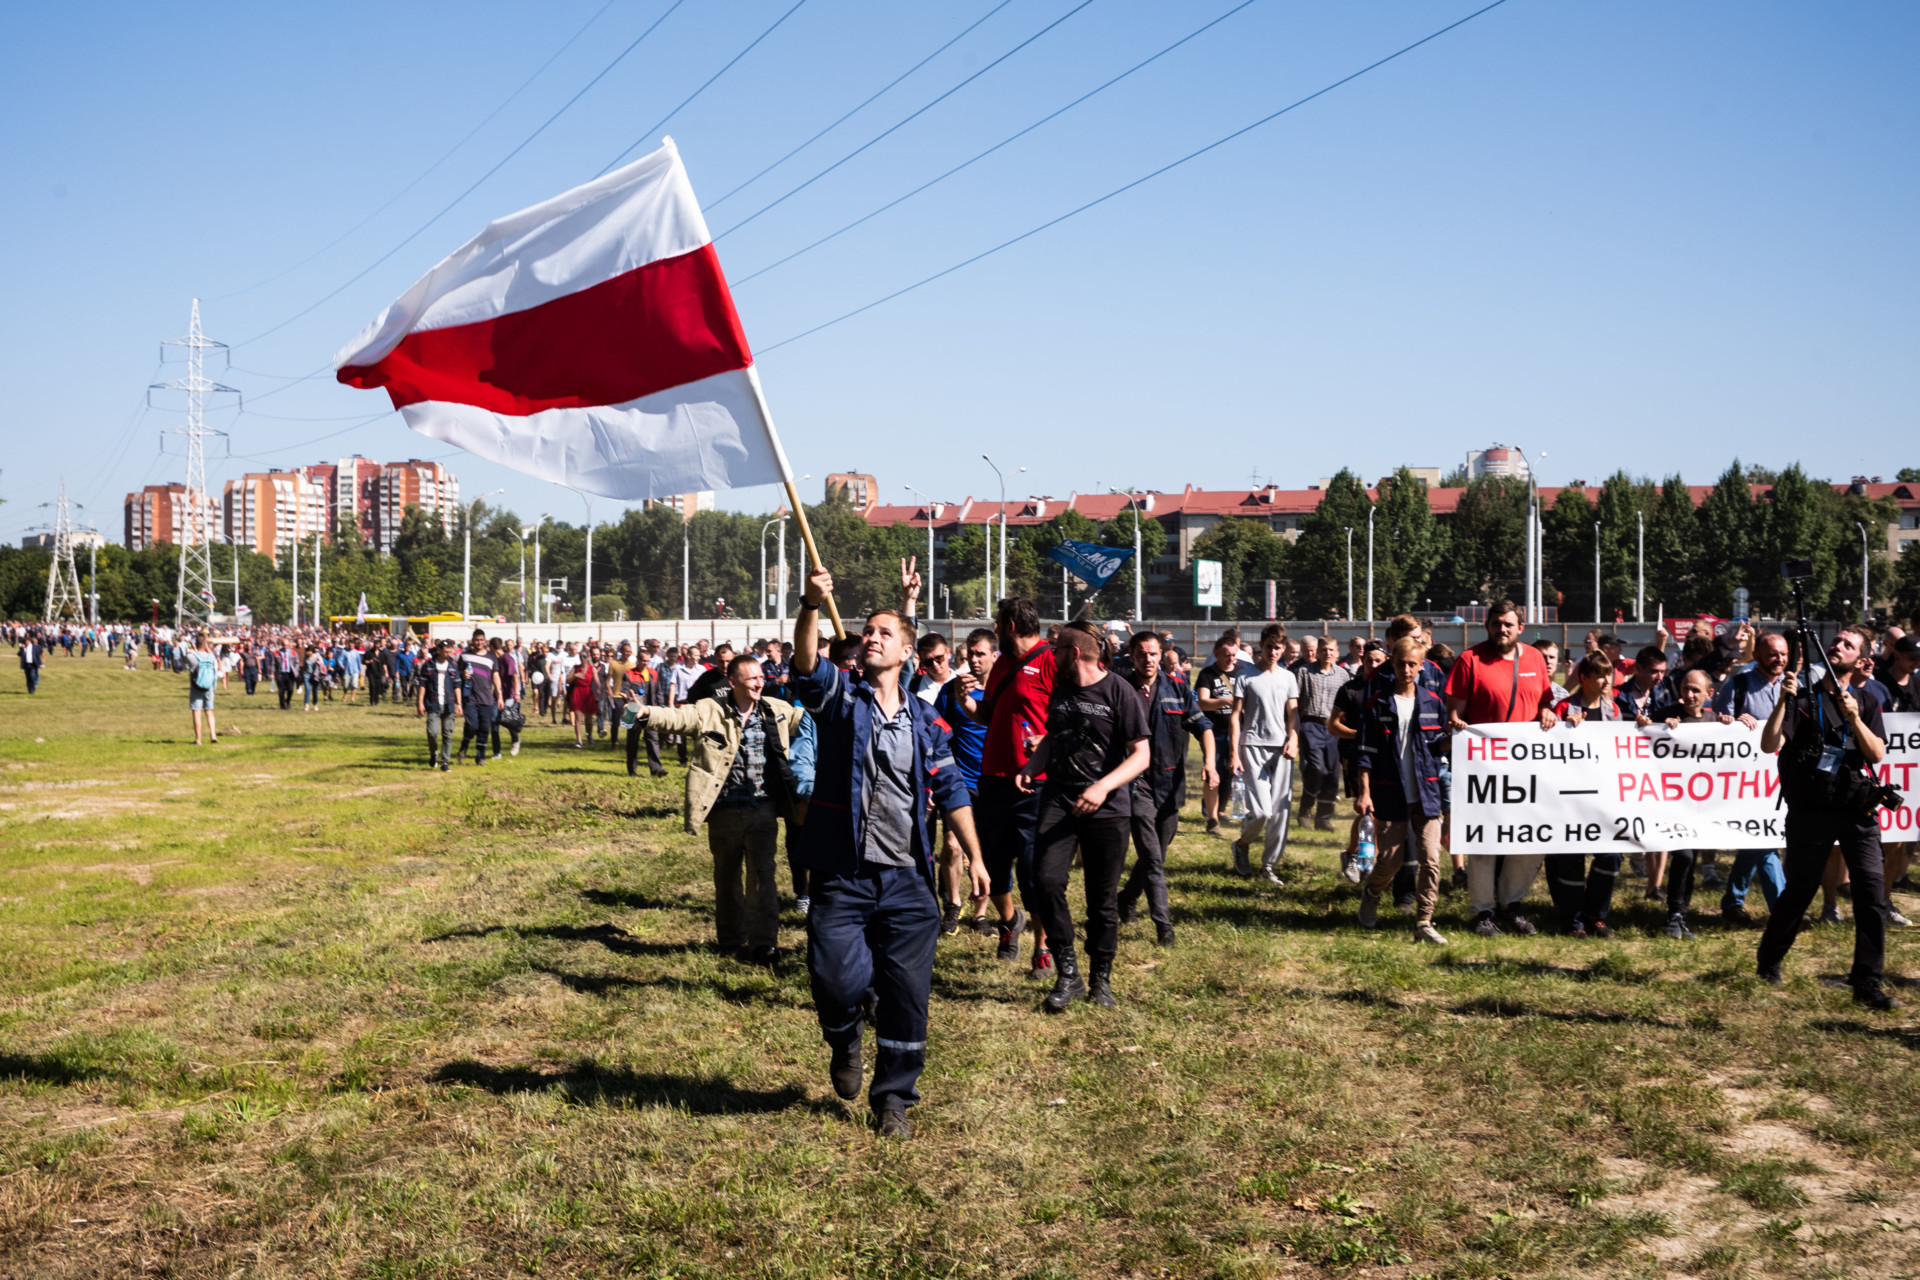 Belarus, Russia-West Rivalry, and the Global Authoritarian Pushback